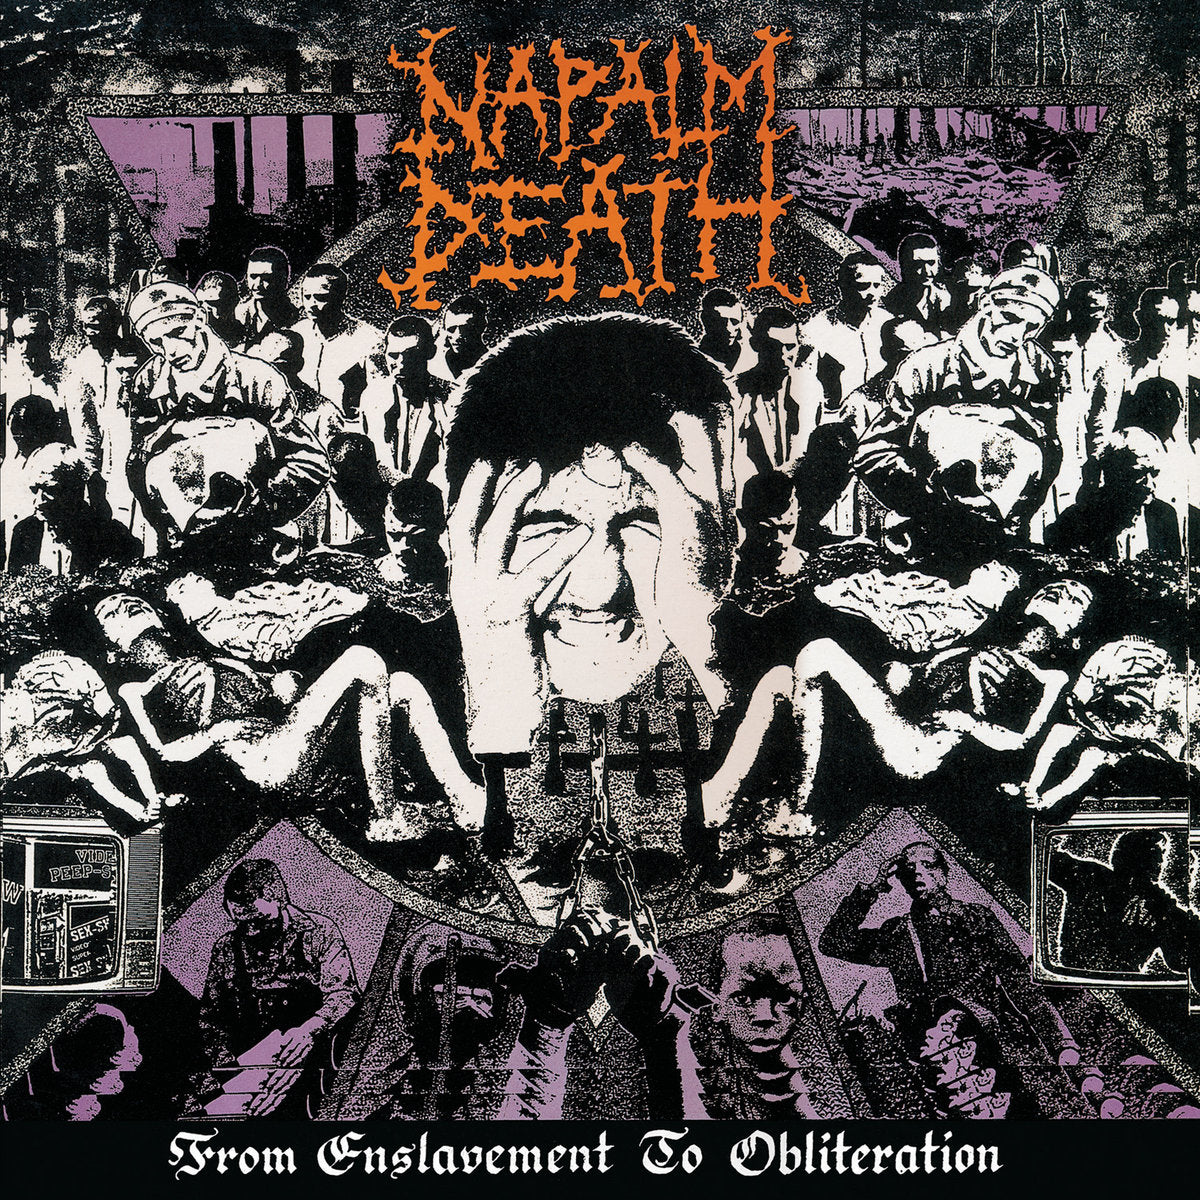 Napalm Death "From Enslavement To Obliteration" FDR Kelly Green Vinyl (Ltd to 300 Copies)